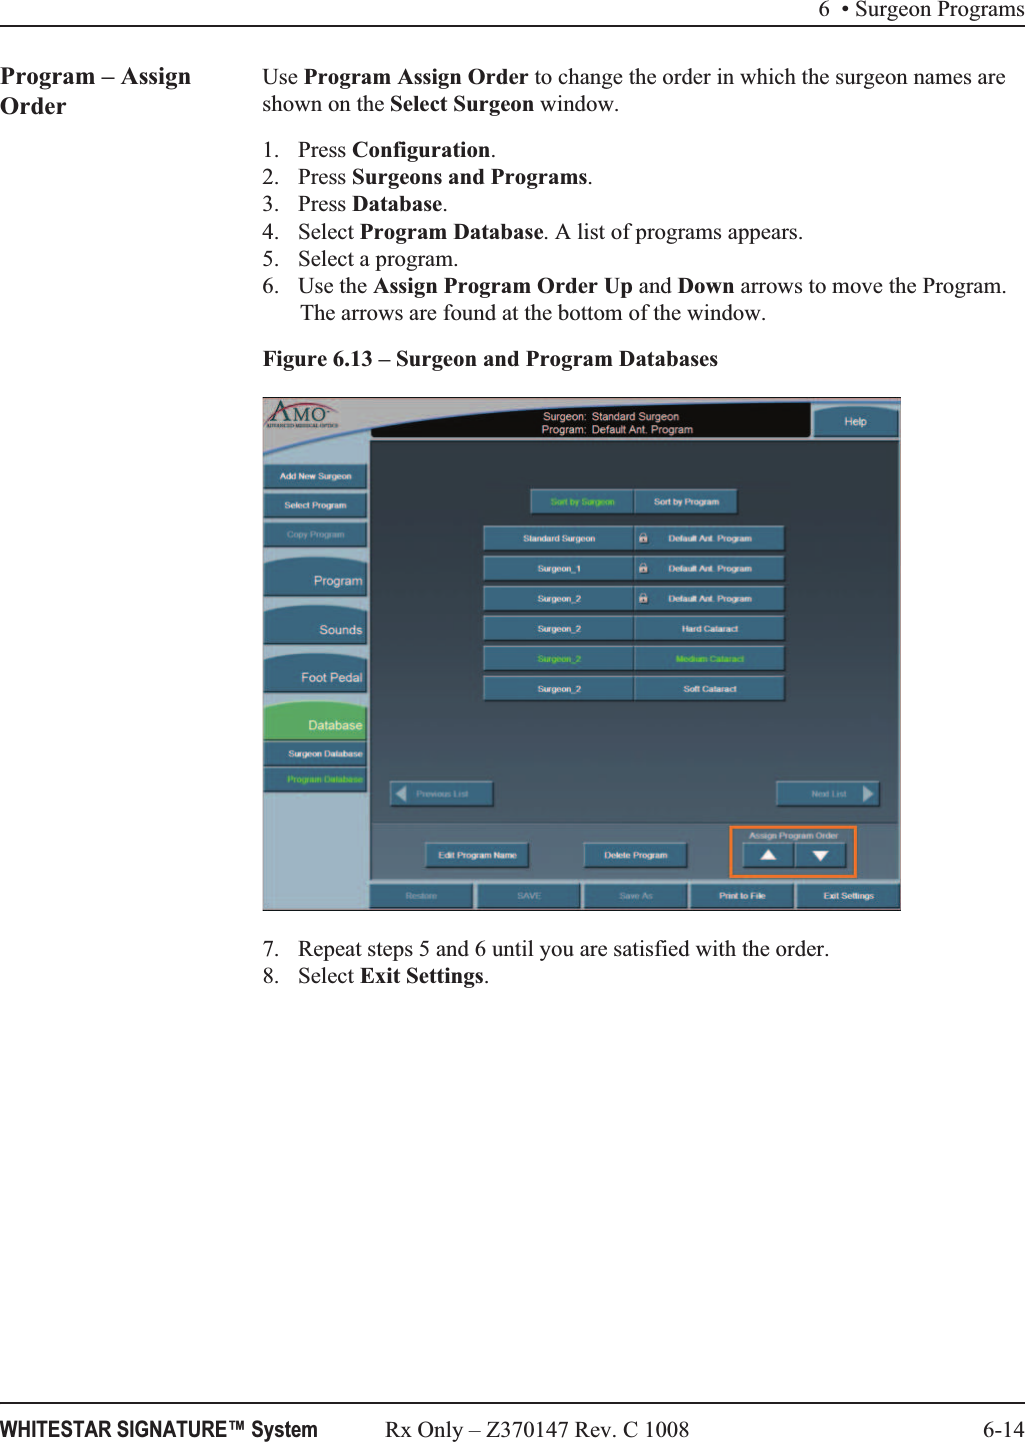 6 • Surgeon ProgramsWHITESTAR SIGNATURE™ System Rx Only – Z370147 Rev. C 1008 6-14Program – Assign OrderUse Program Assign Order to change the order in which the surgeon names are shown on the Select Surgeon window.1. Press Configuration. 2. Press Surgeons and Programs.3. Press Database.4. Select Program Database. A list of programs appears.5. Select a program.6. Use the Assign Program Order Up and Down arrows to move the Program. The arrows are found at the bottom of the window.Figure 6.13 – Surgeon and Program Databases7. Repeat steps 5 and 6 until you are satisfied with the order. 8. Select Exit Settings.